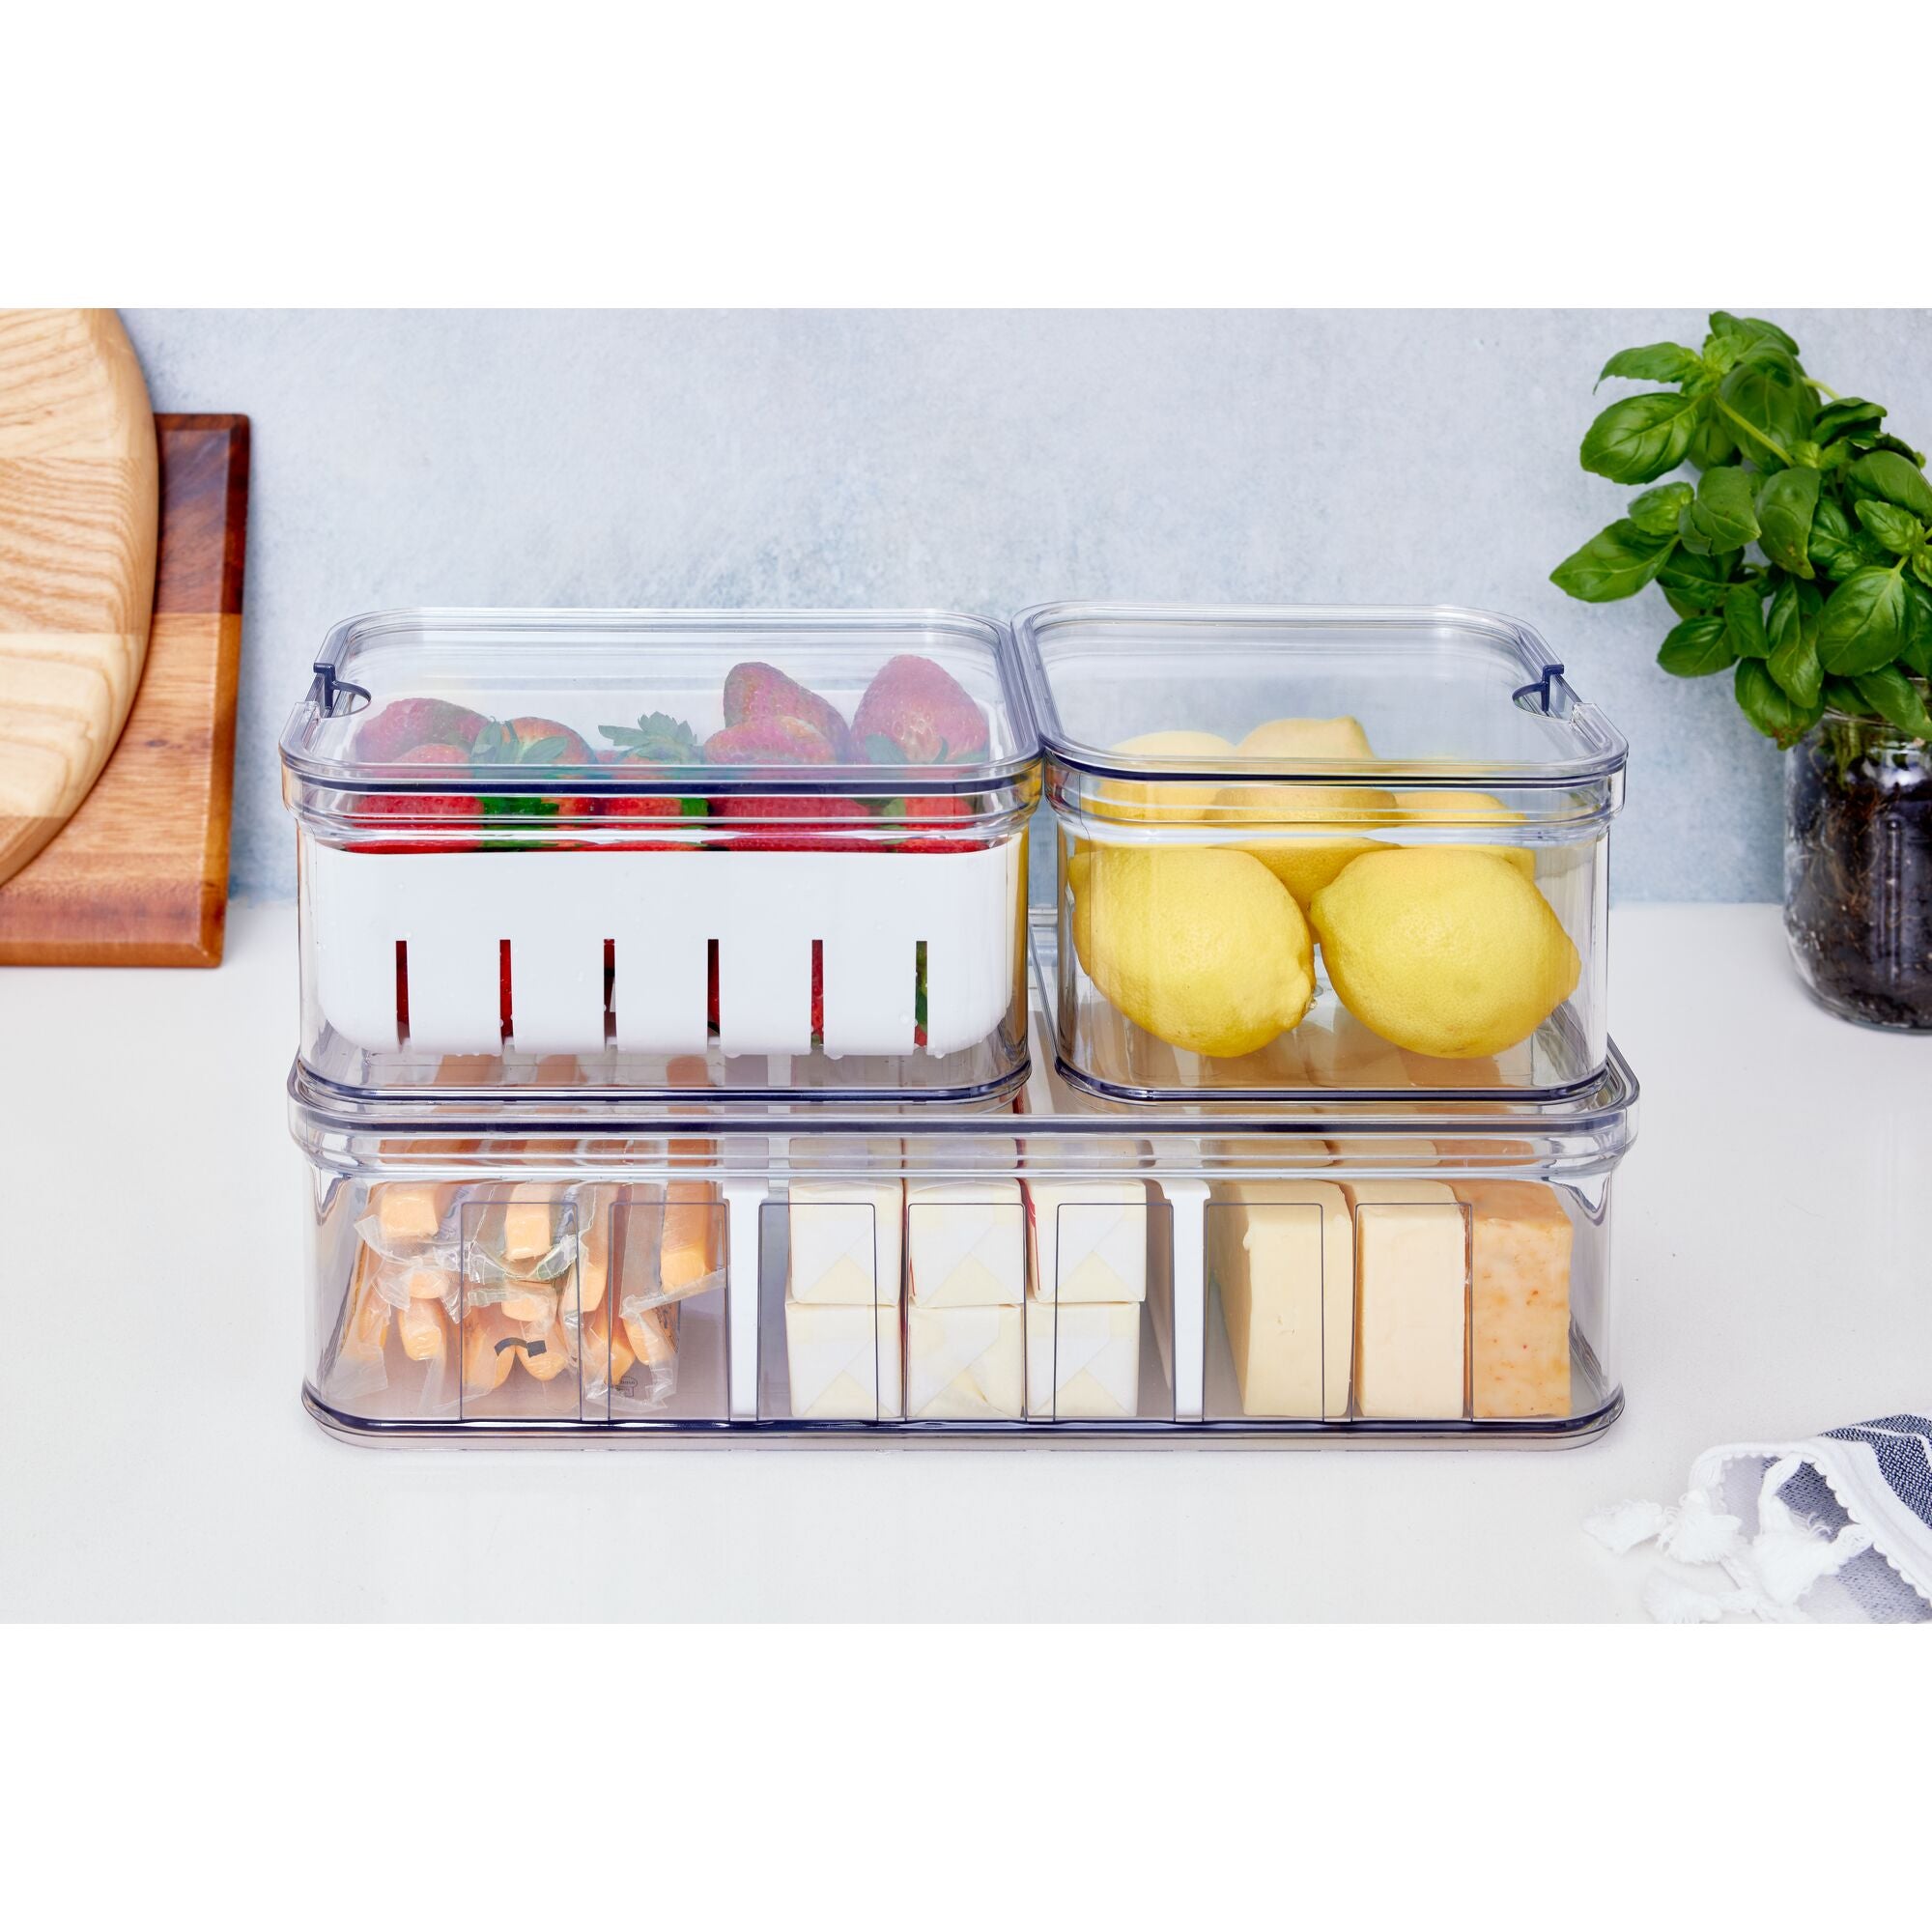 Best Storage Containers For Refrigerator 3L / 4M / 3S (PACK OF 10